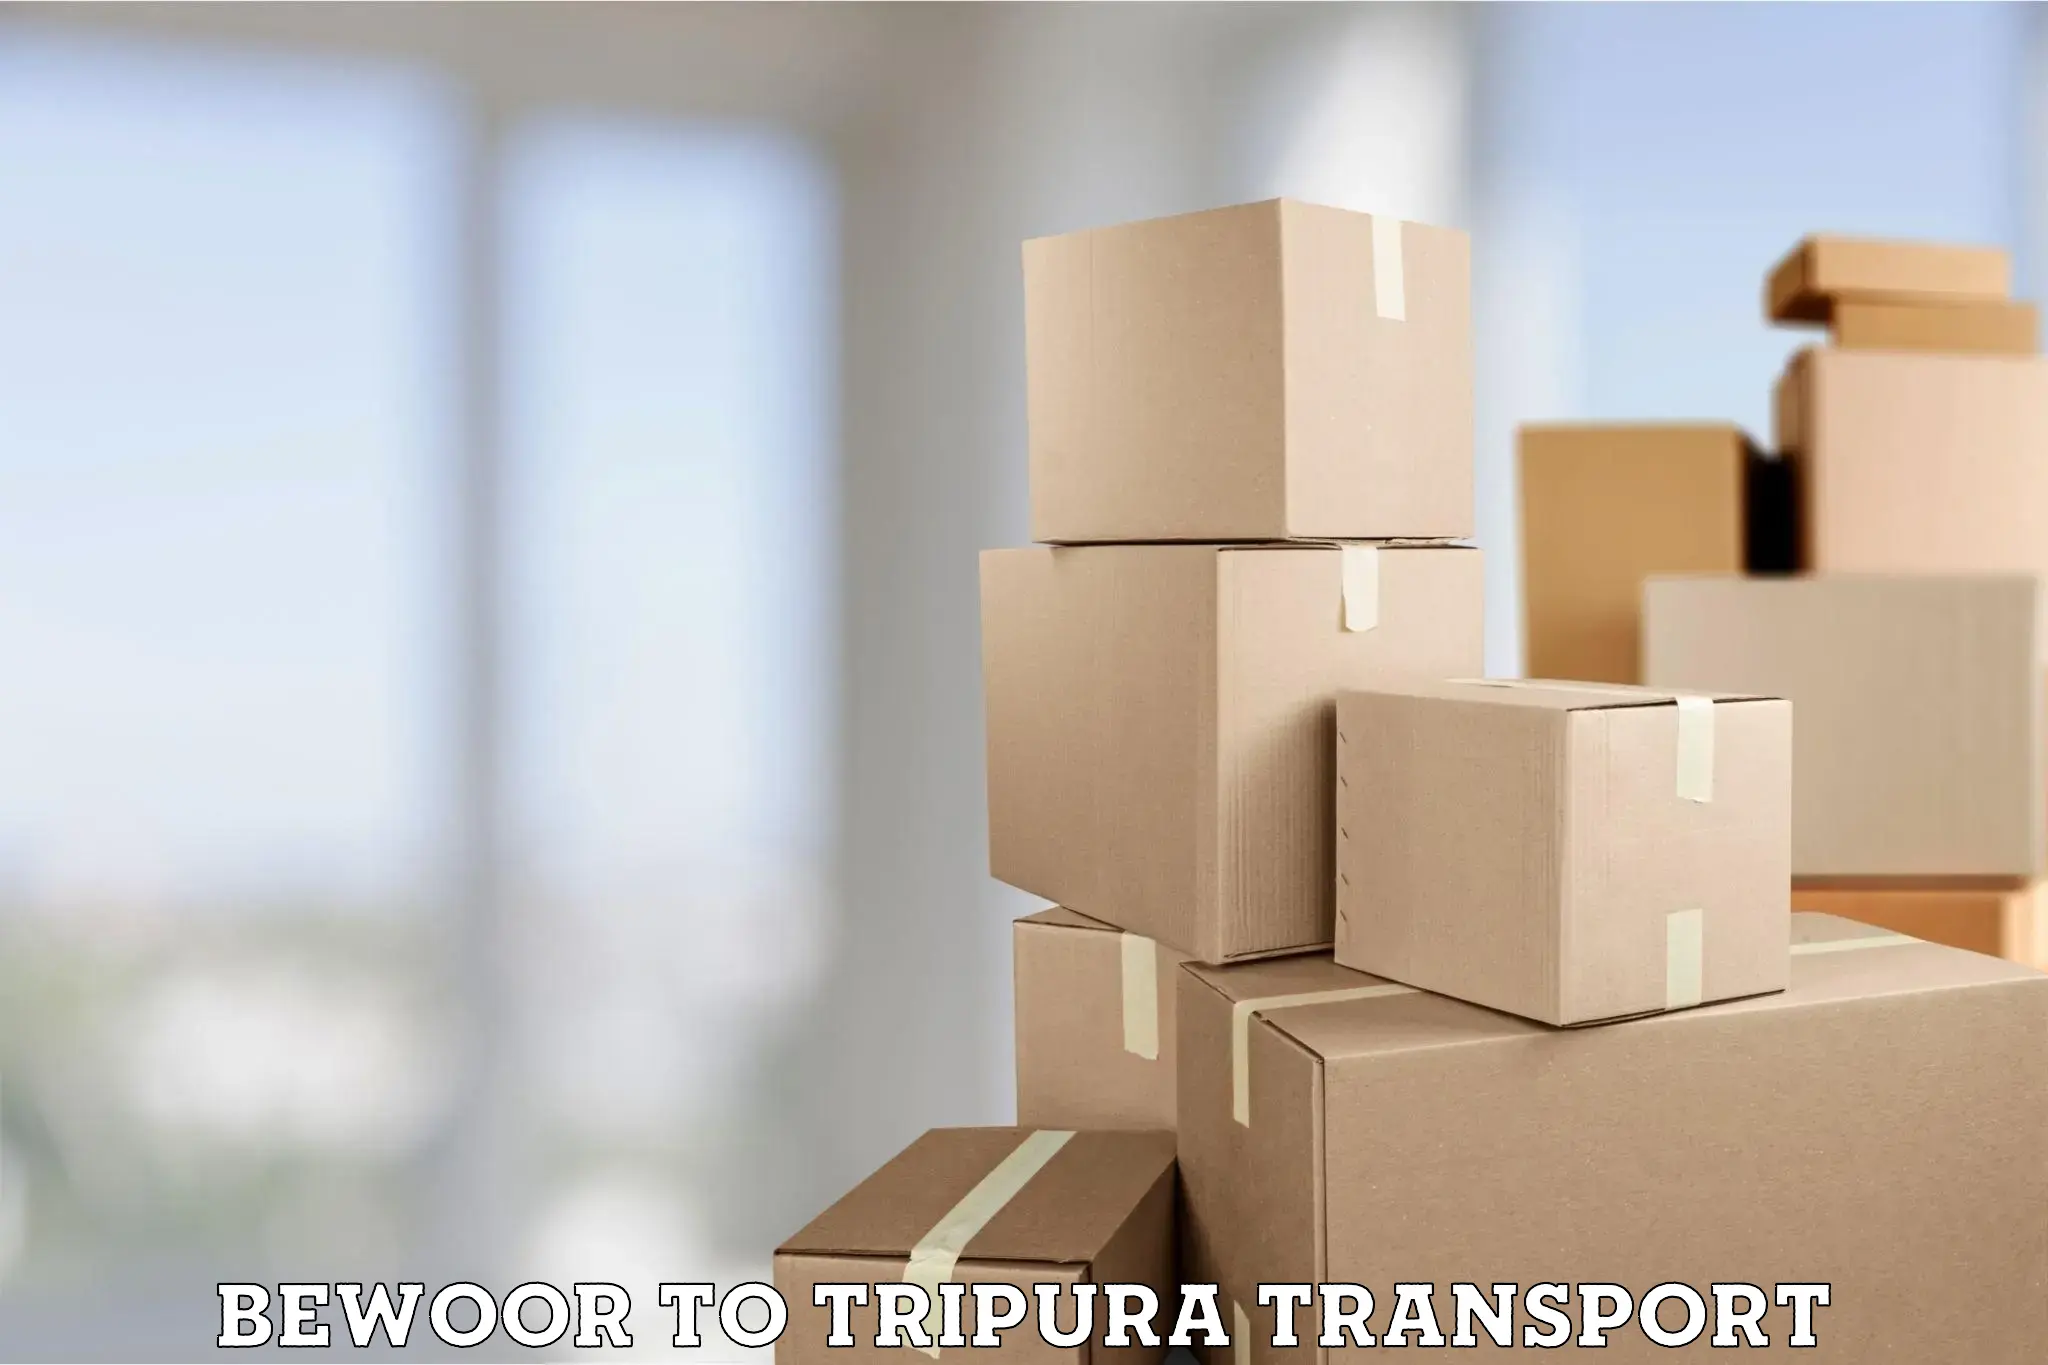 Daily transport service Bewoor to Tripura